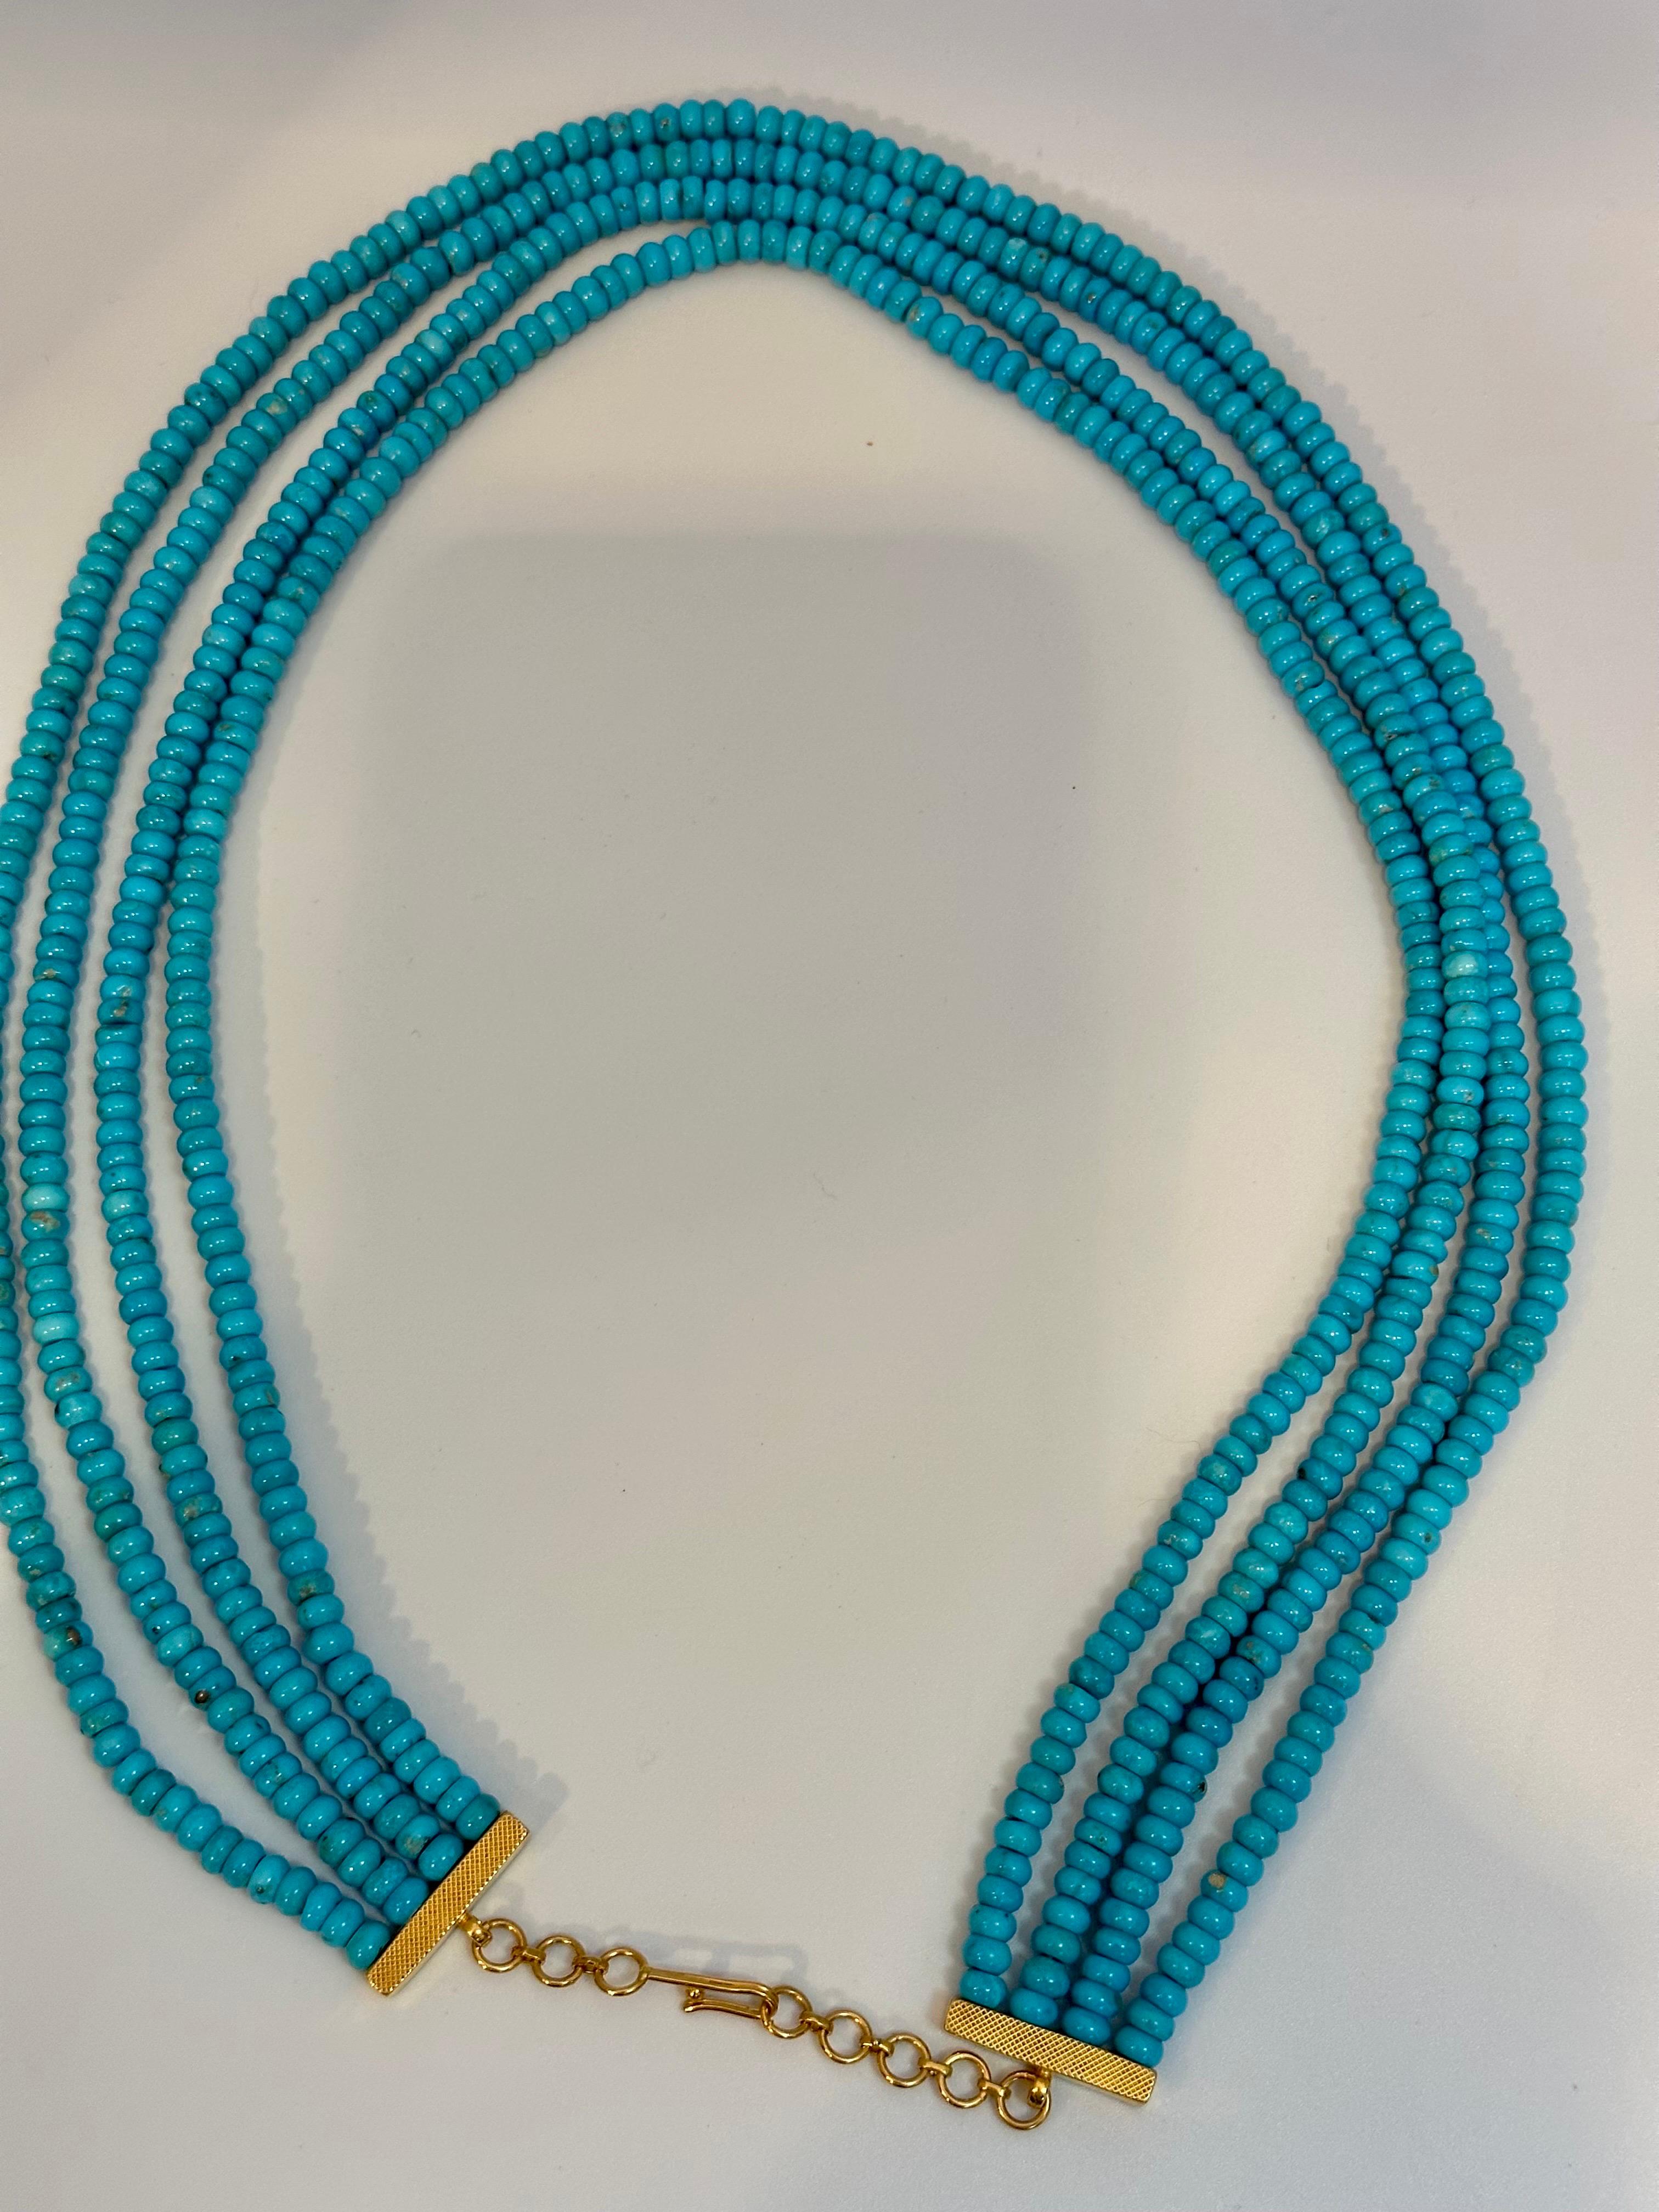 500 Carat Natural Sleeping Beauty Turquoise Necklace, Four Strand 14 Karat Gold
Natural Sleeping Beauty Turquoise which is very hard to find now.
Necklace has 4 strand
Approximately 5 mm each bead
14 Karat  Yellow gold clasp
20 Inches long
Please